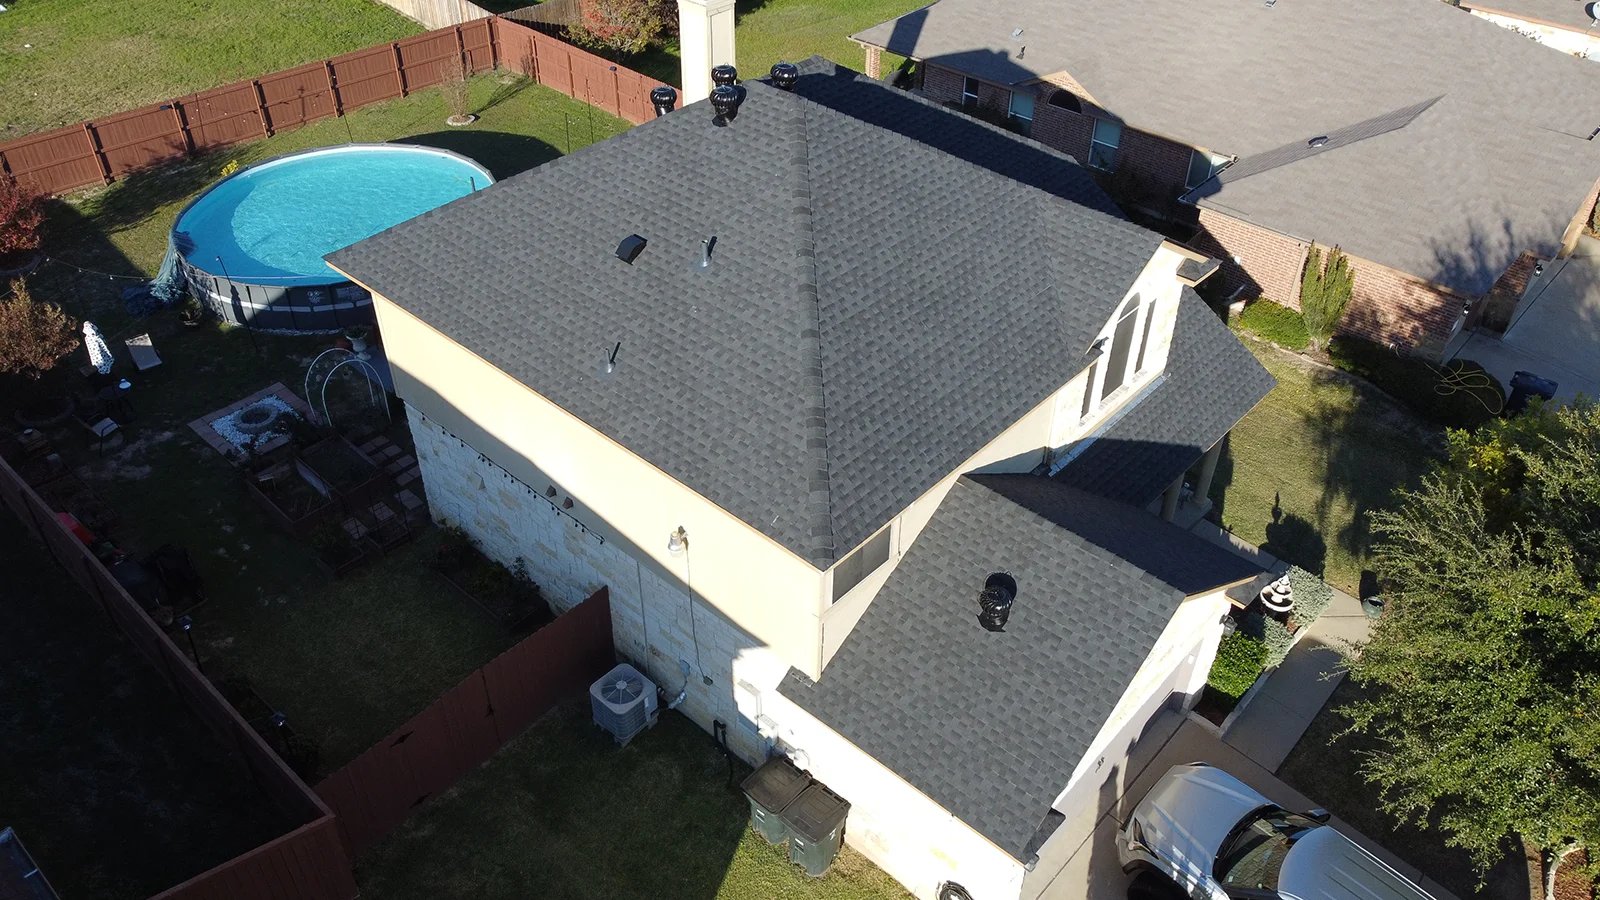 Roof Repair and roof installation by Roam Roof in Leander Texas.